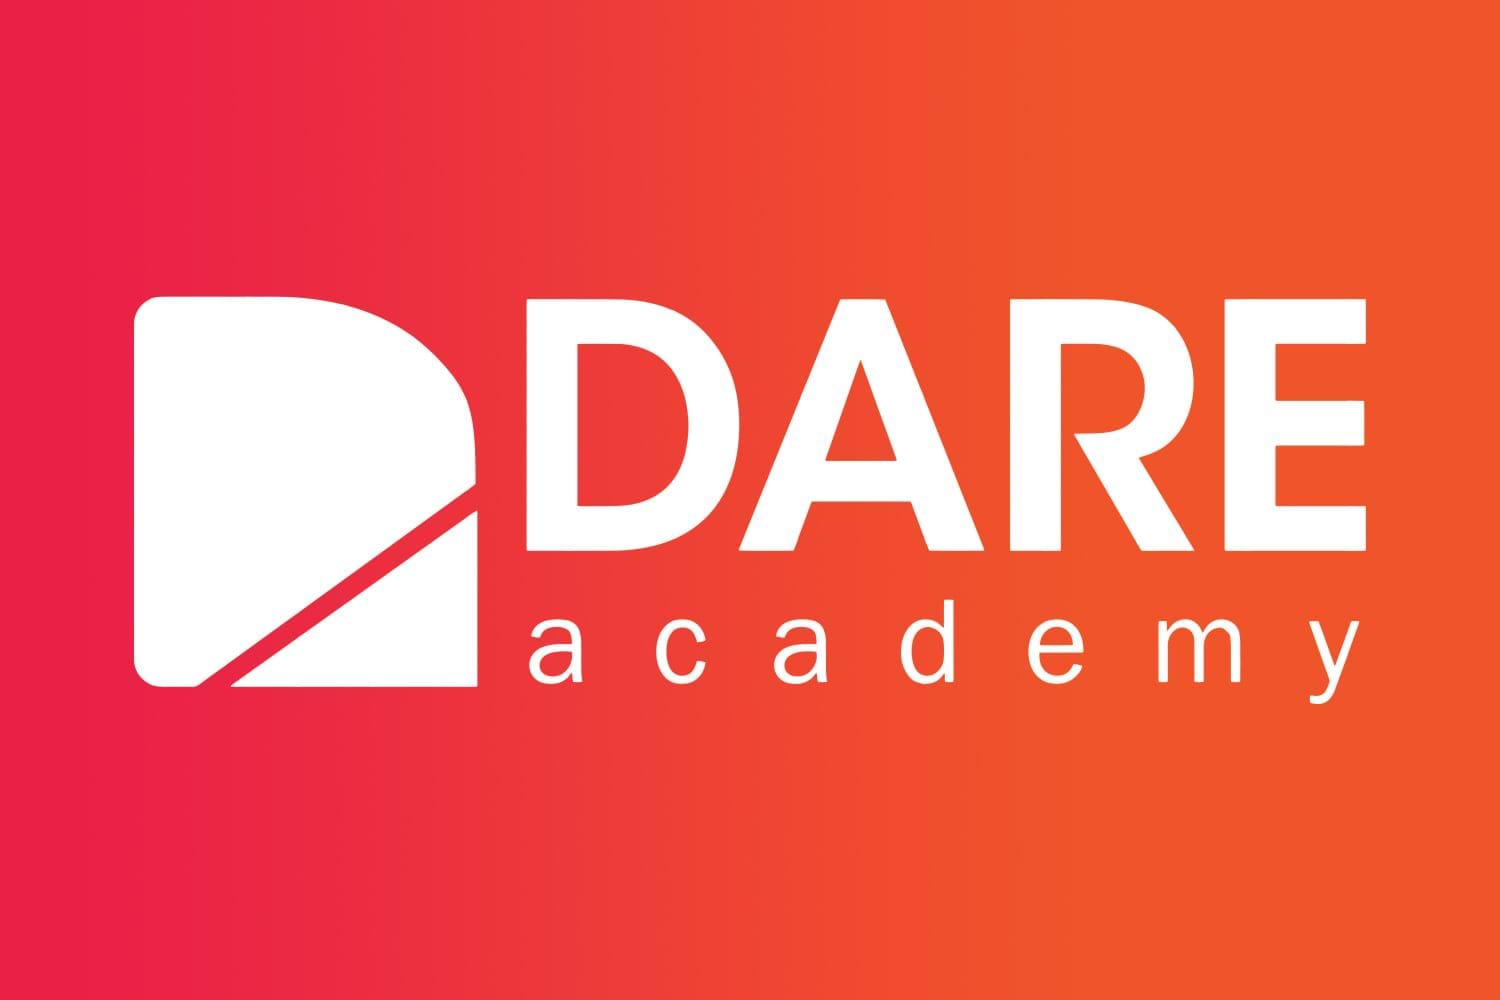 The image shows the dare academy logo on an orange background